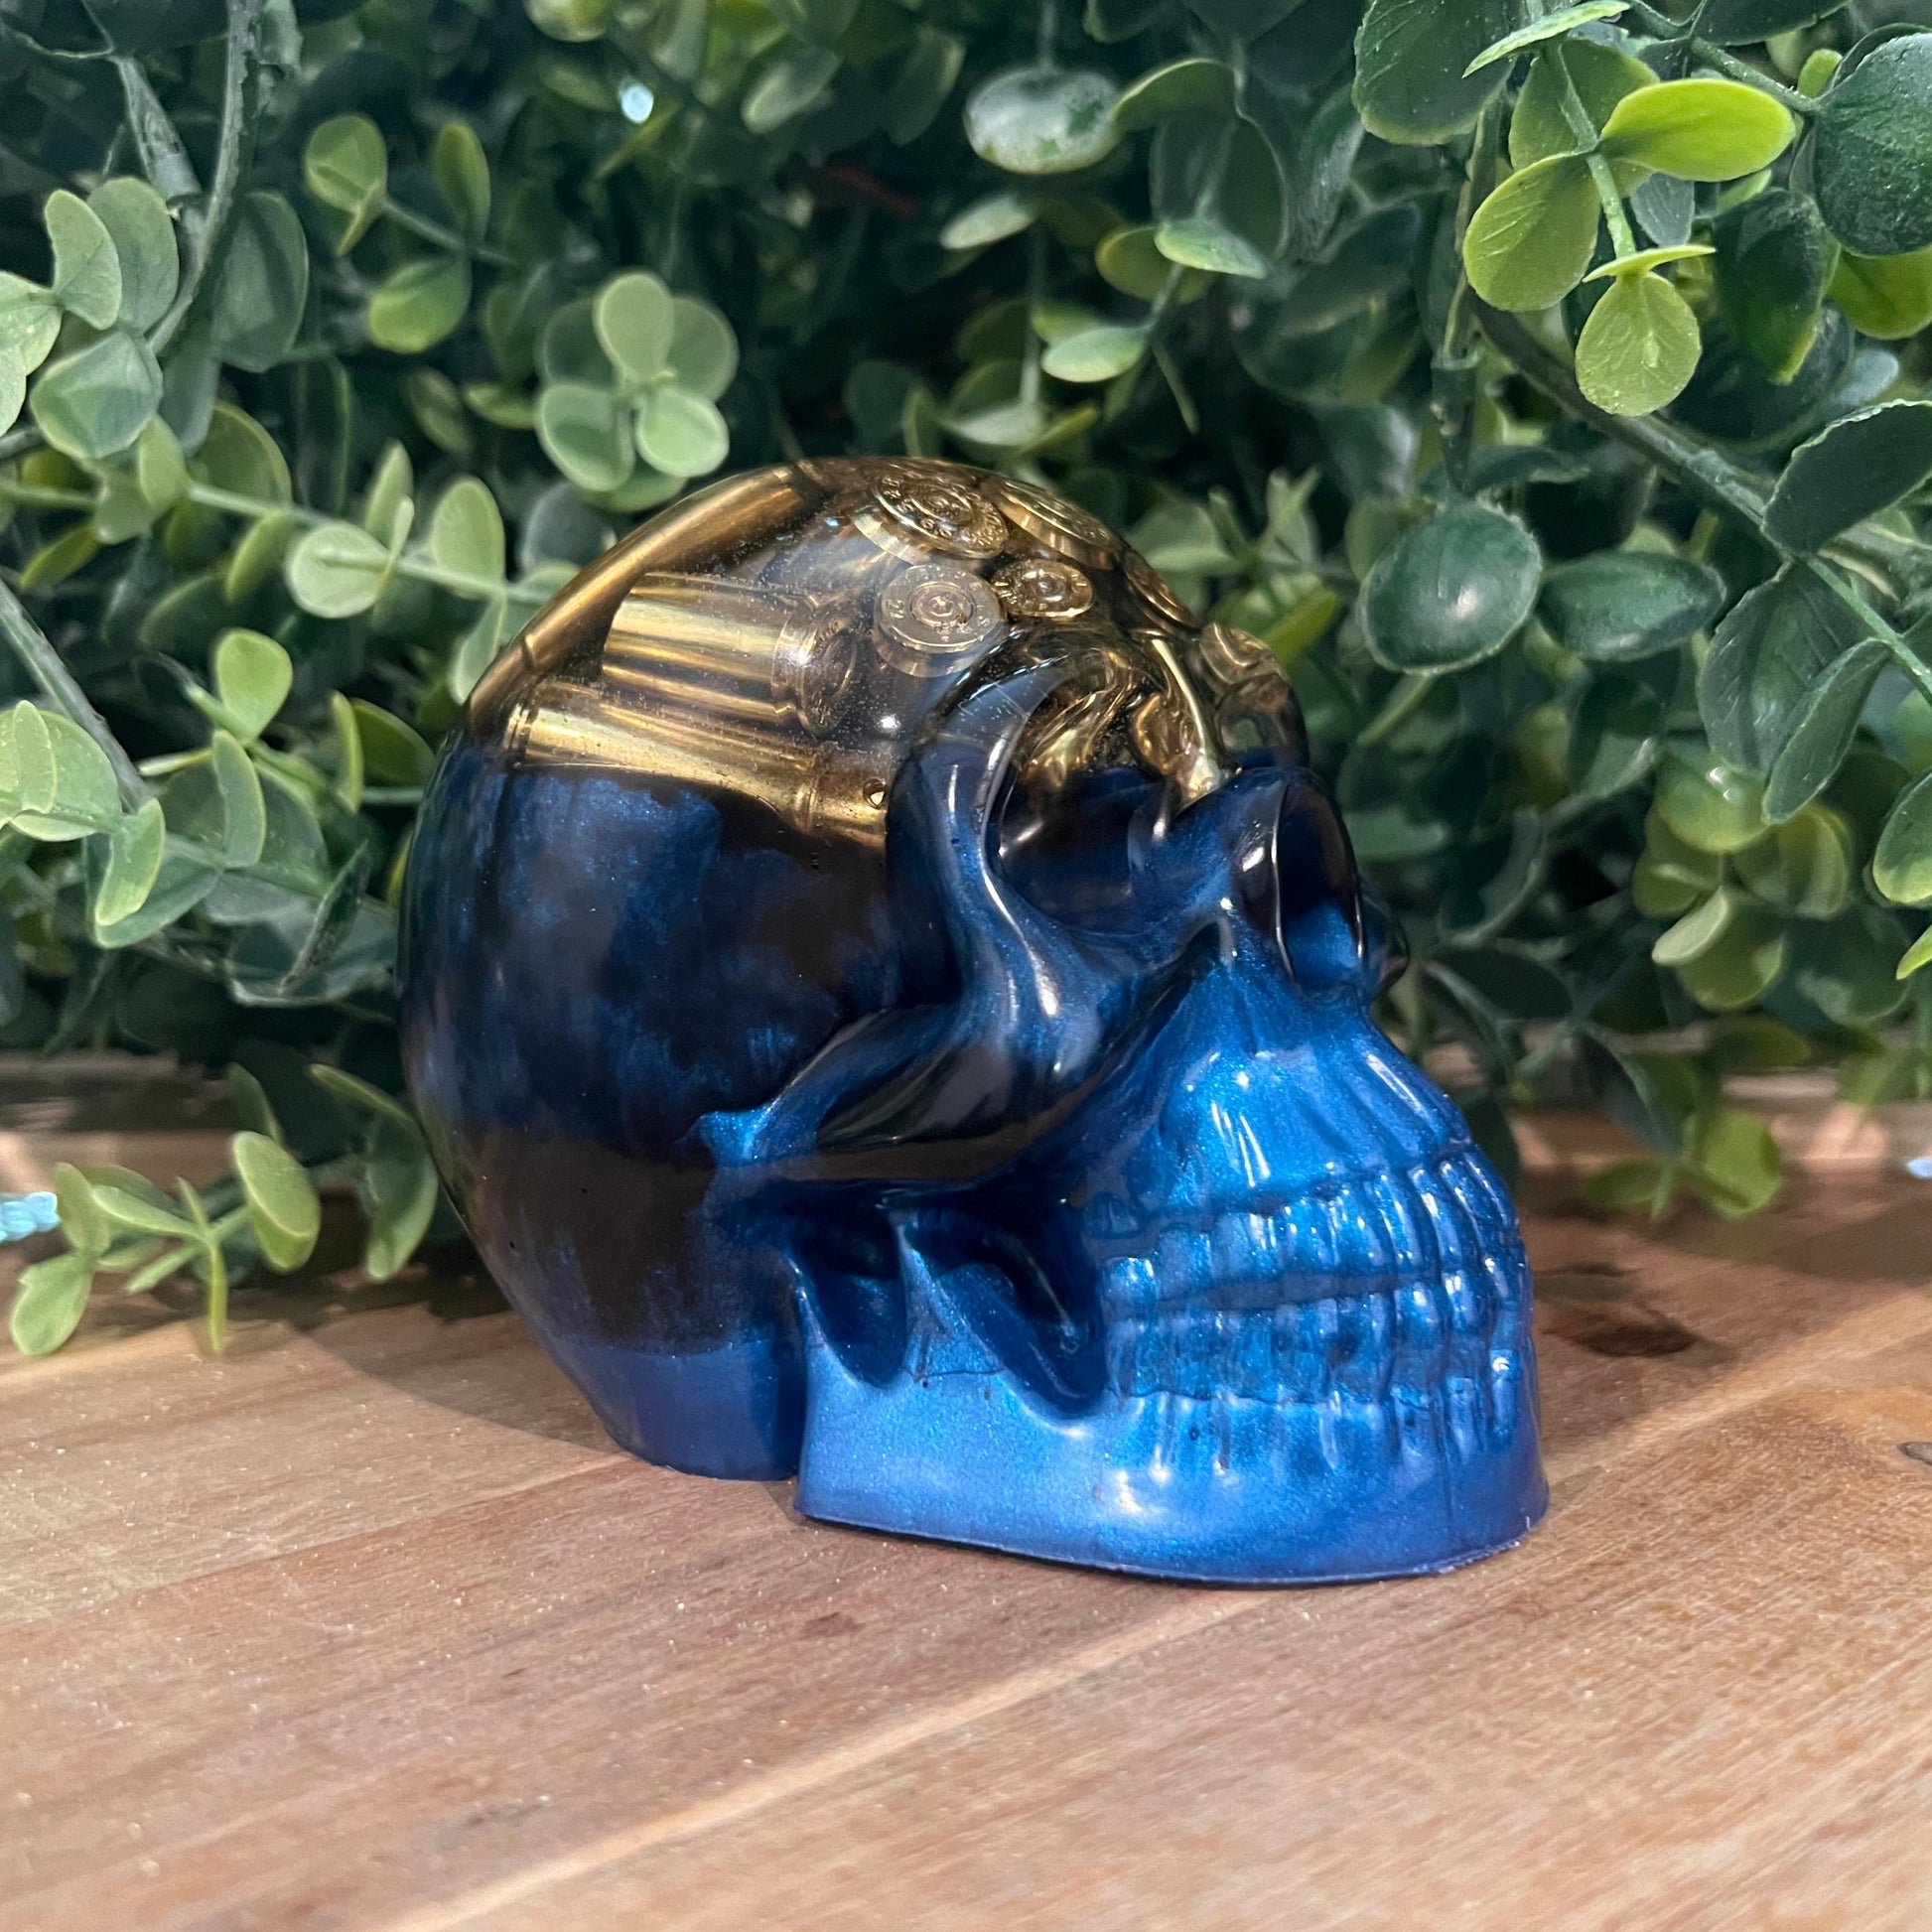 Blue and Black Skull - Up In Arms